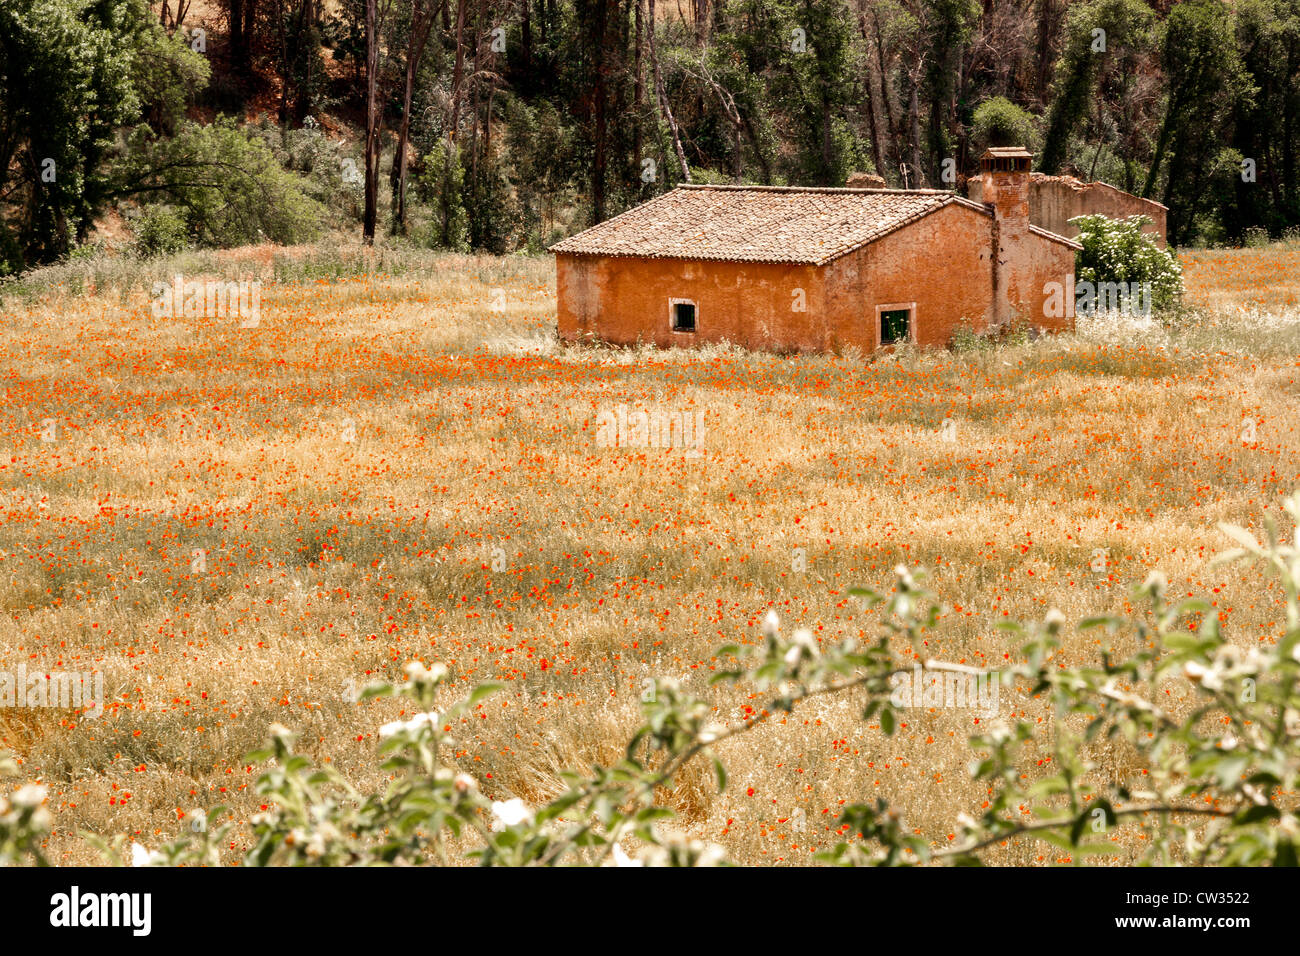 Old ruined farm house in field of wild grass and poppies. Andalusia, Spain, Europe. Stock Photo